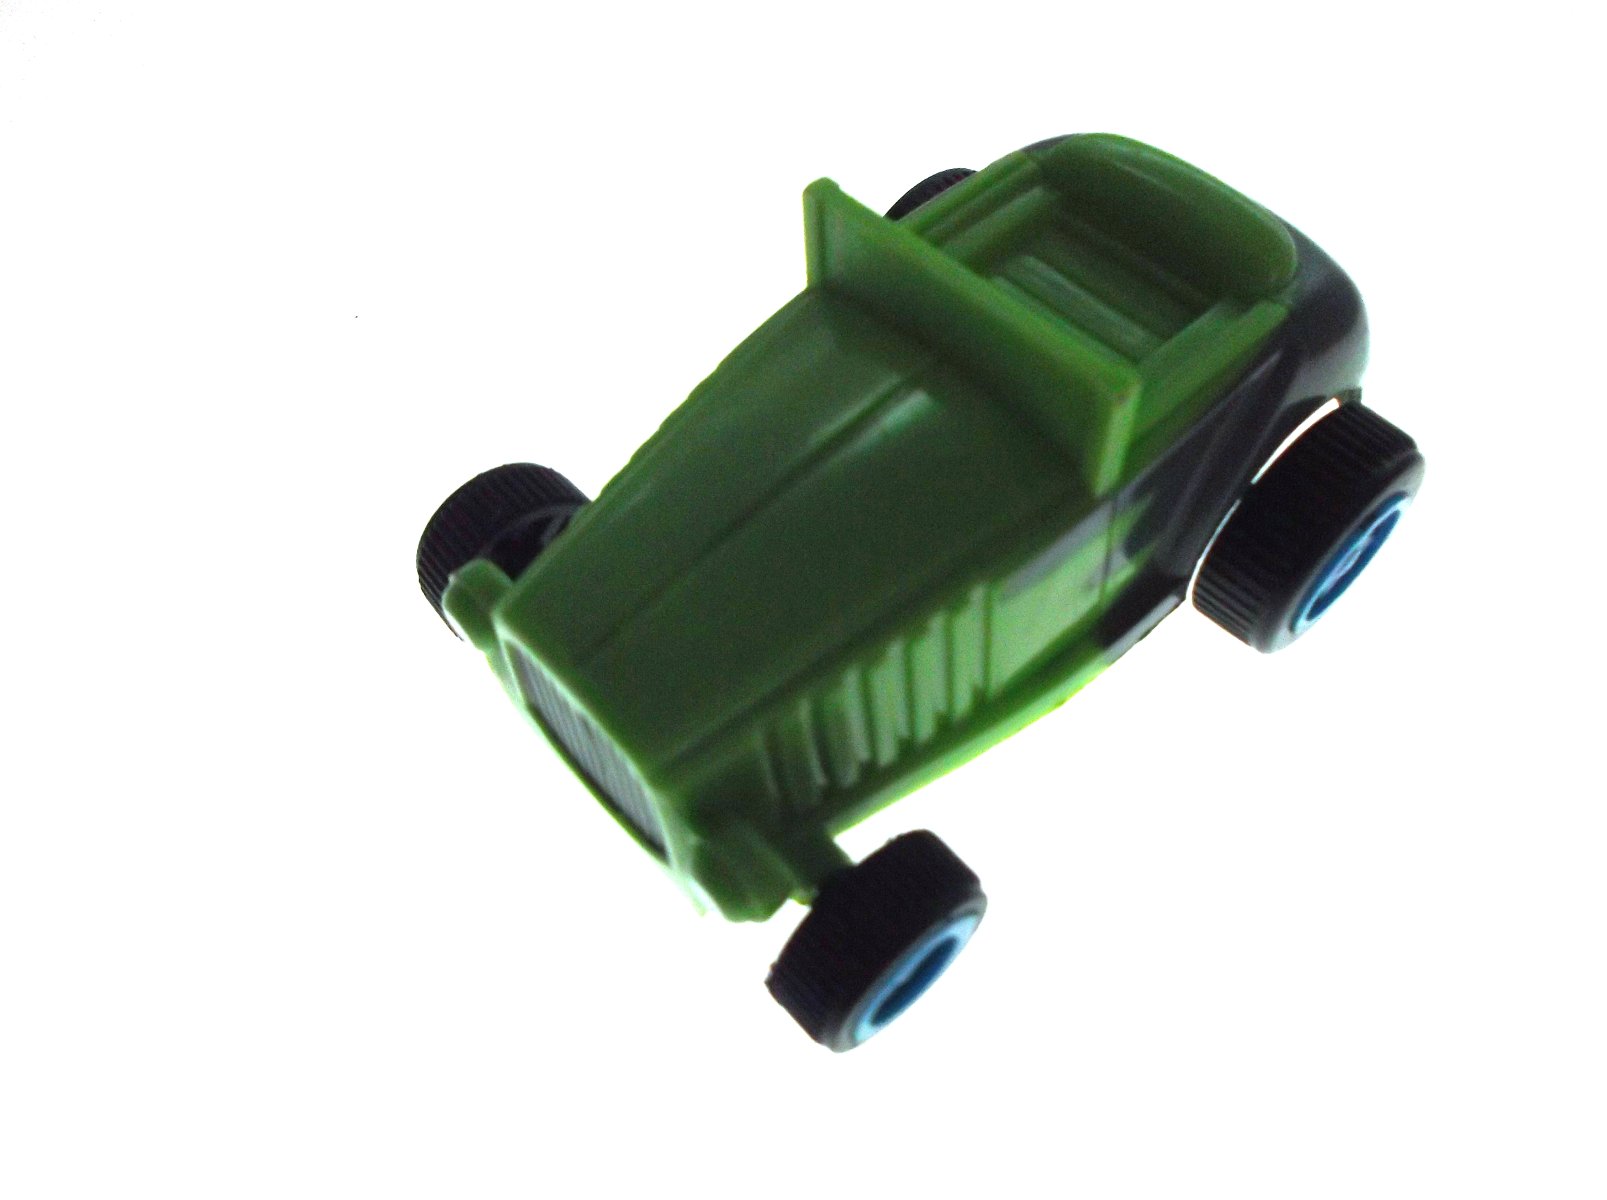 Green toy car, Auto, Speed, New, Over, HQ Photo